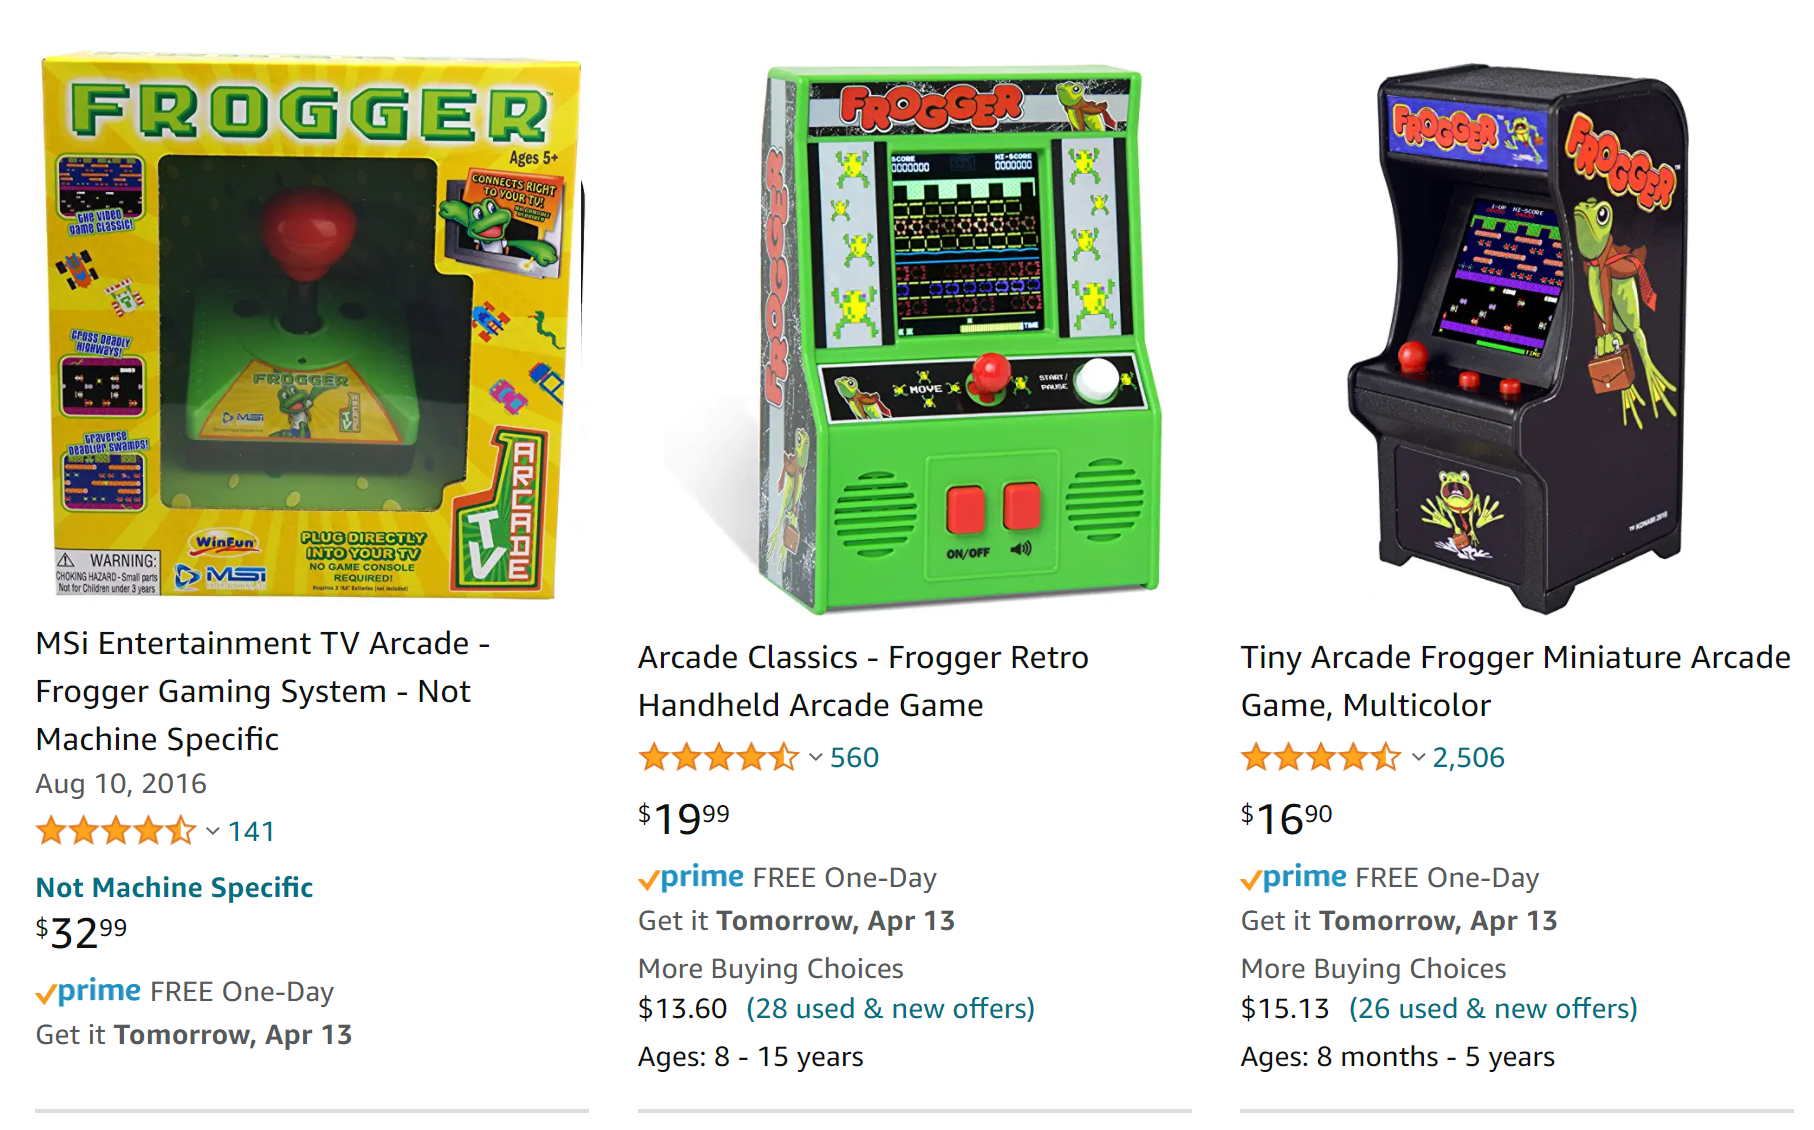 frogger games for sale on amazon.com